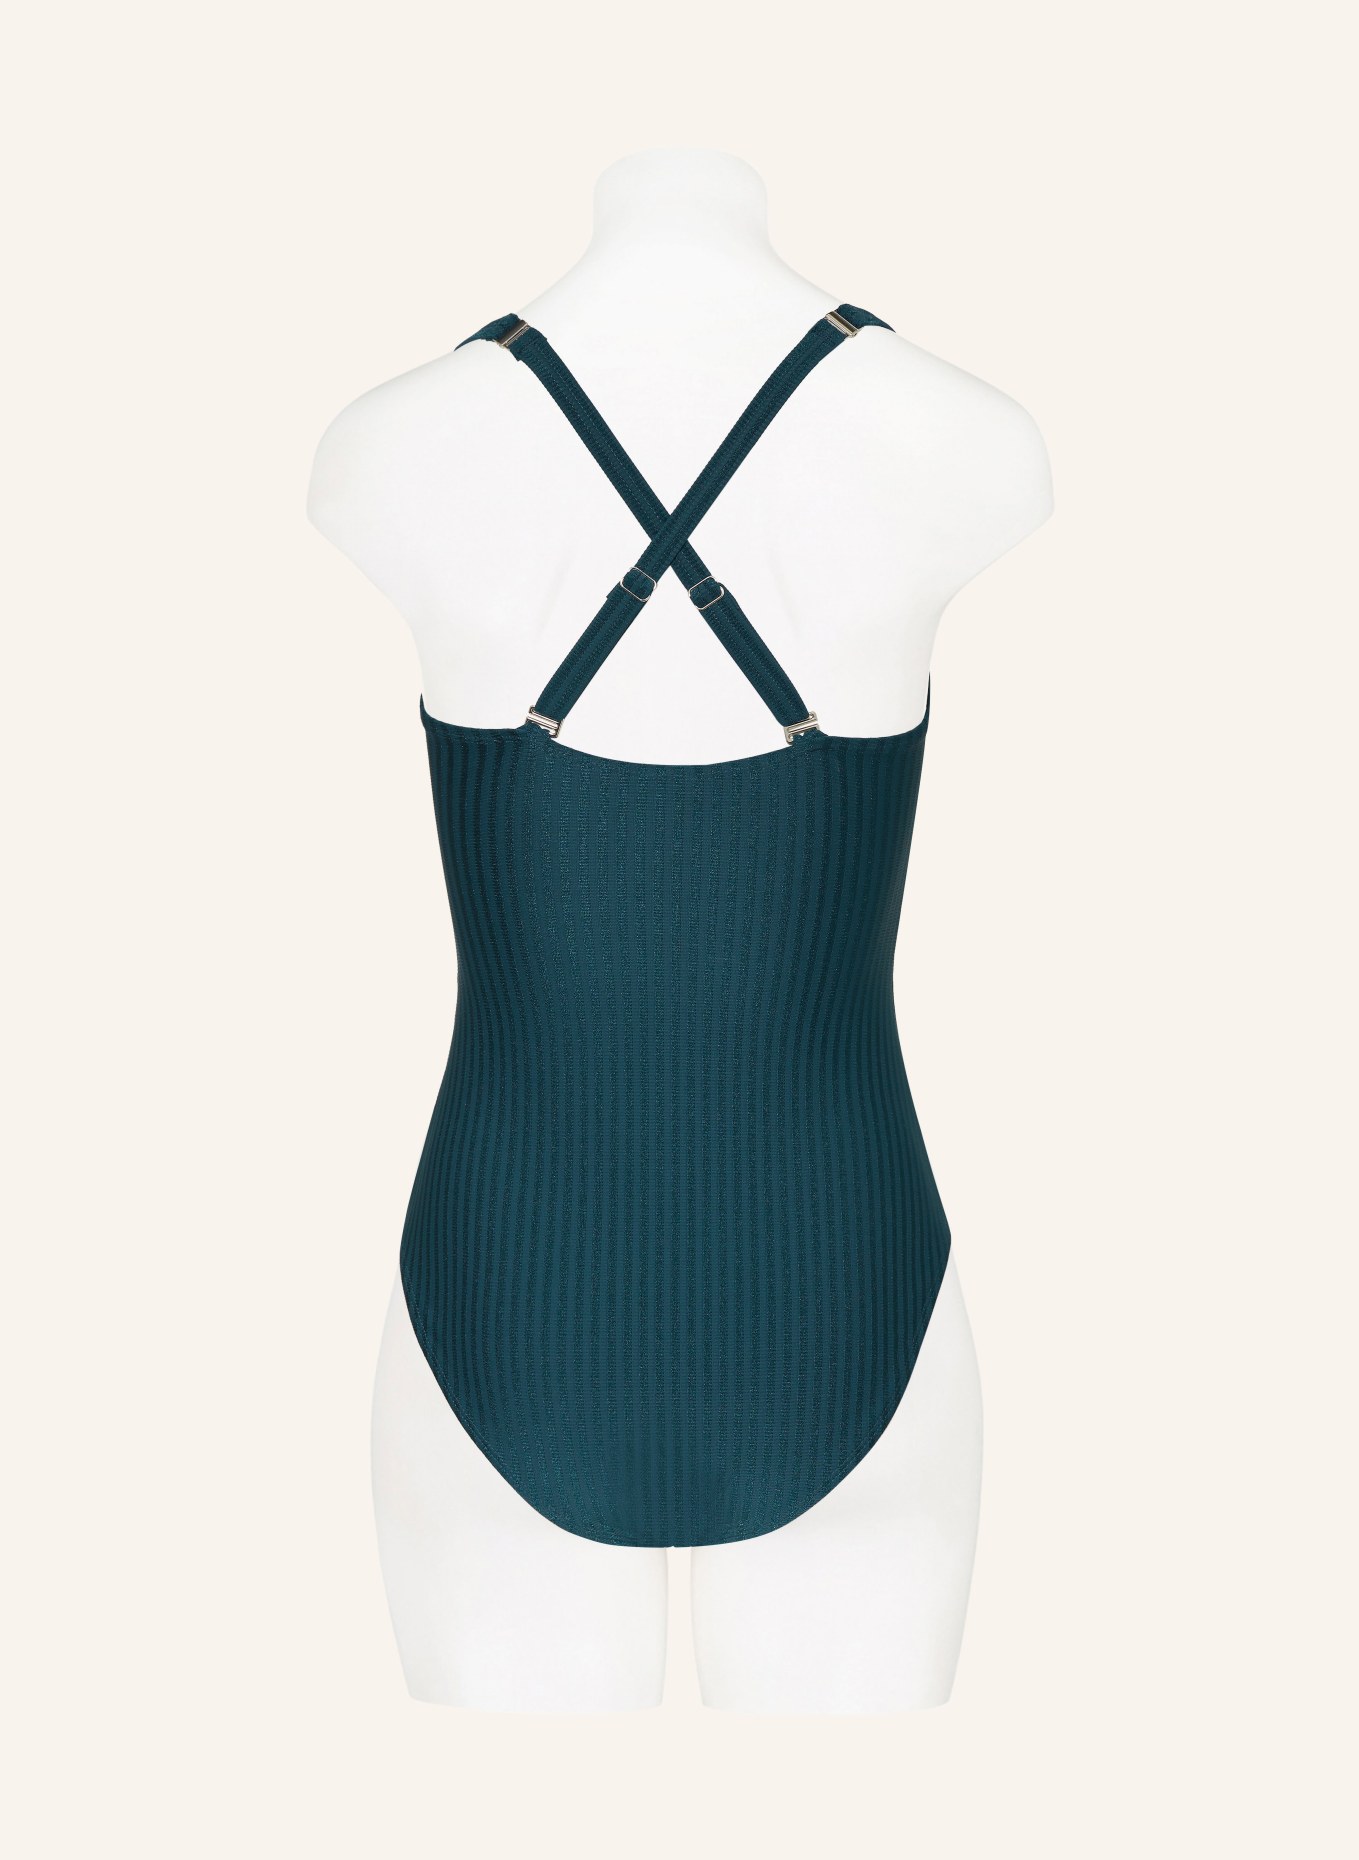 BEACHLIFE Swimsuit REFLECTING POND, Color: TEAL (Image 6)